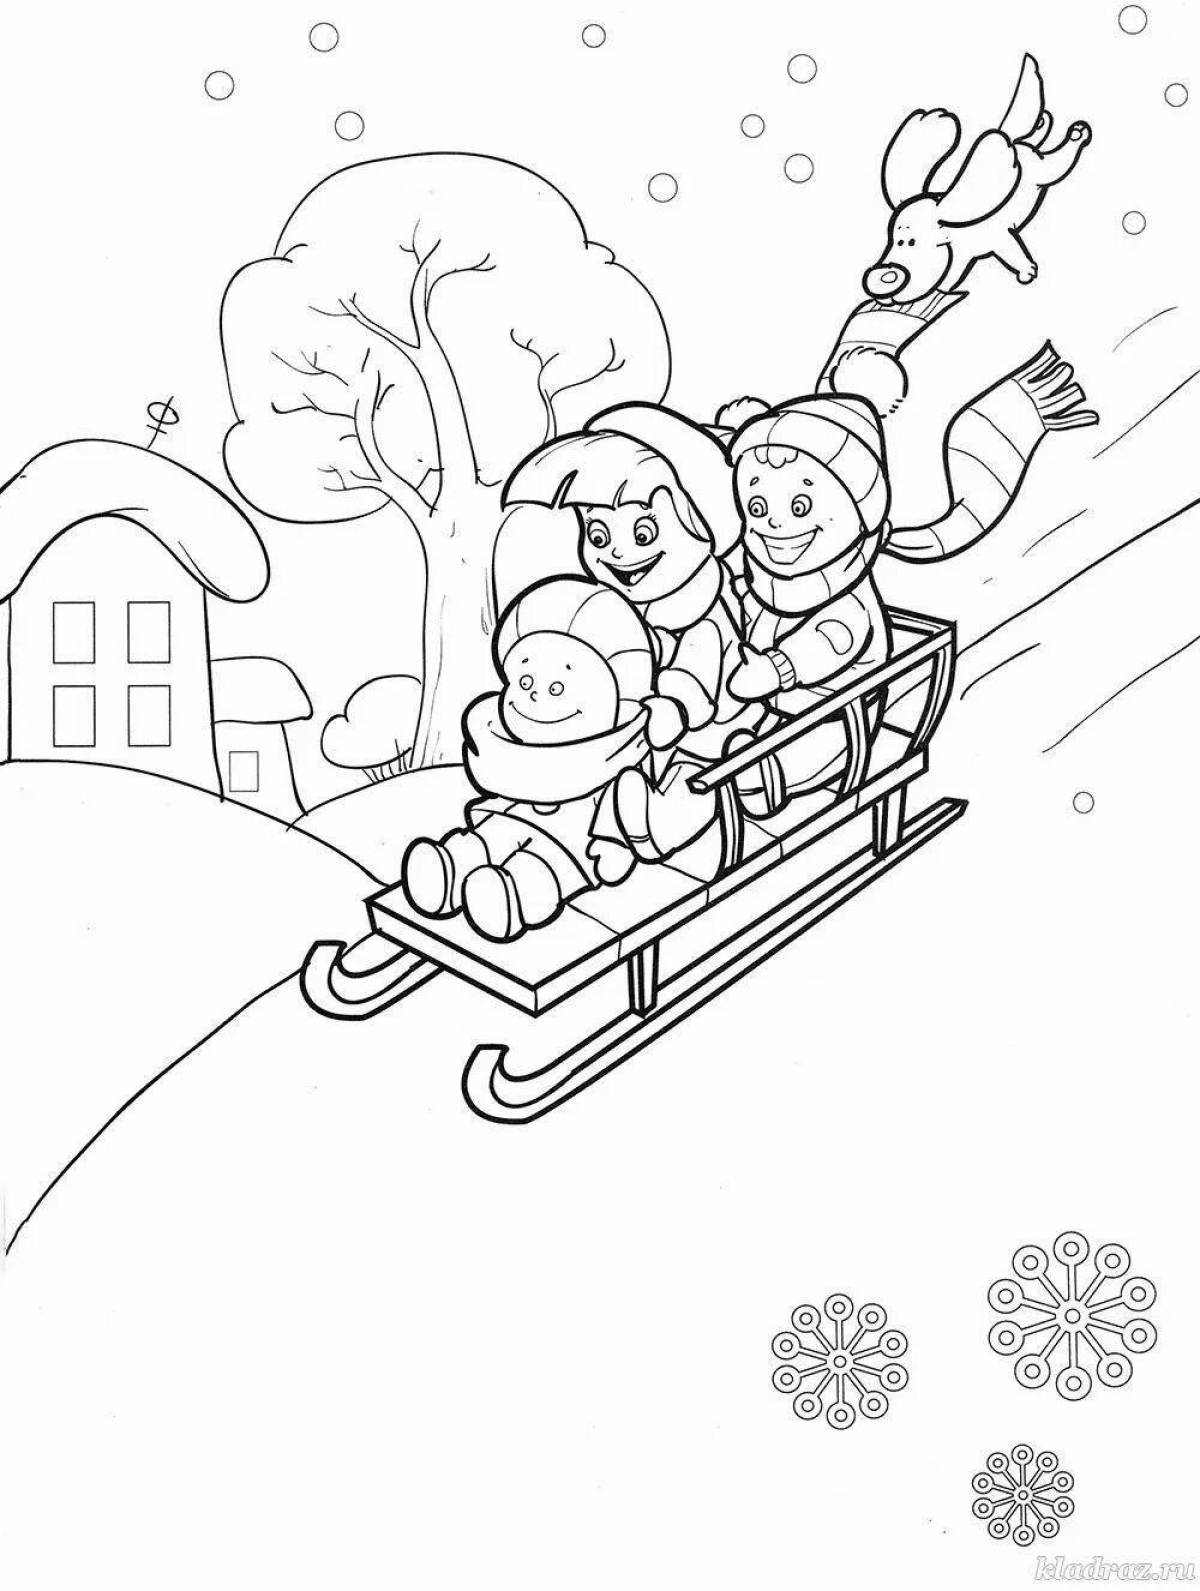 Fun coloring book for kids outdoors in winter